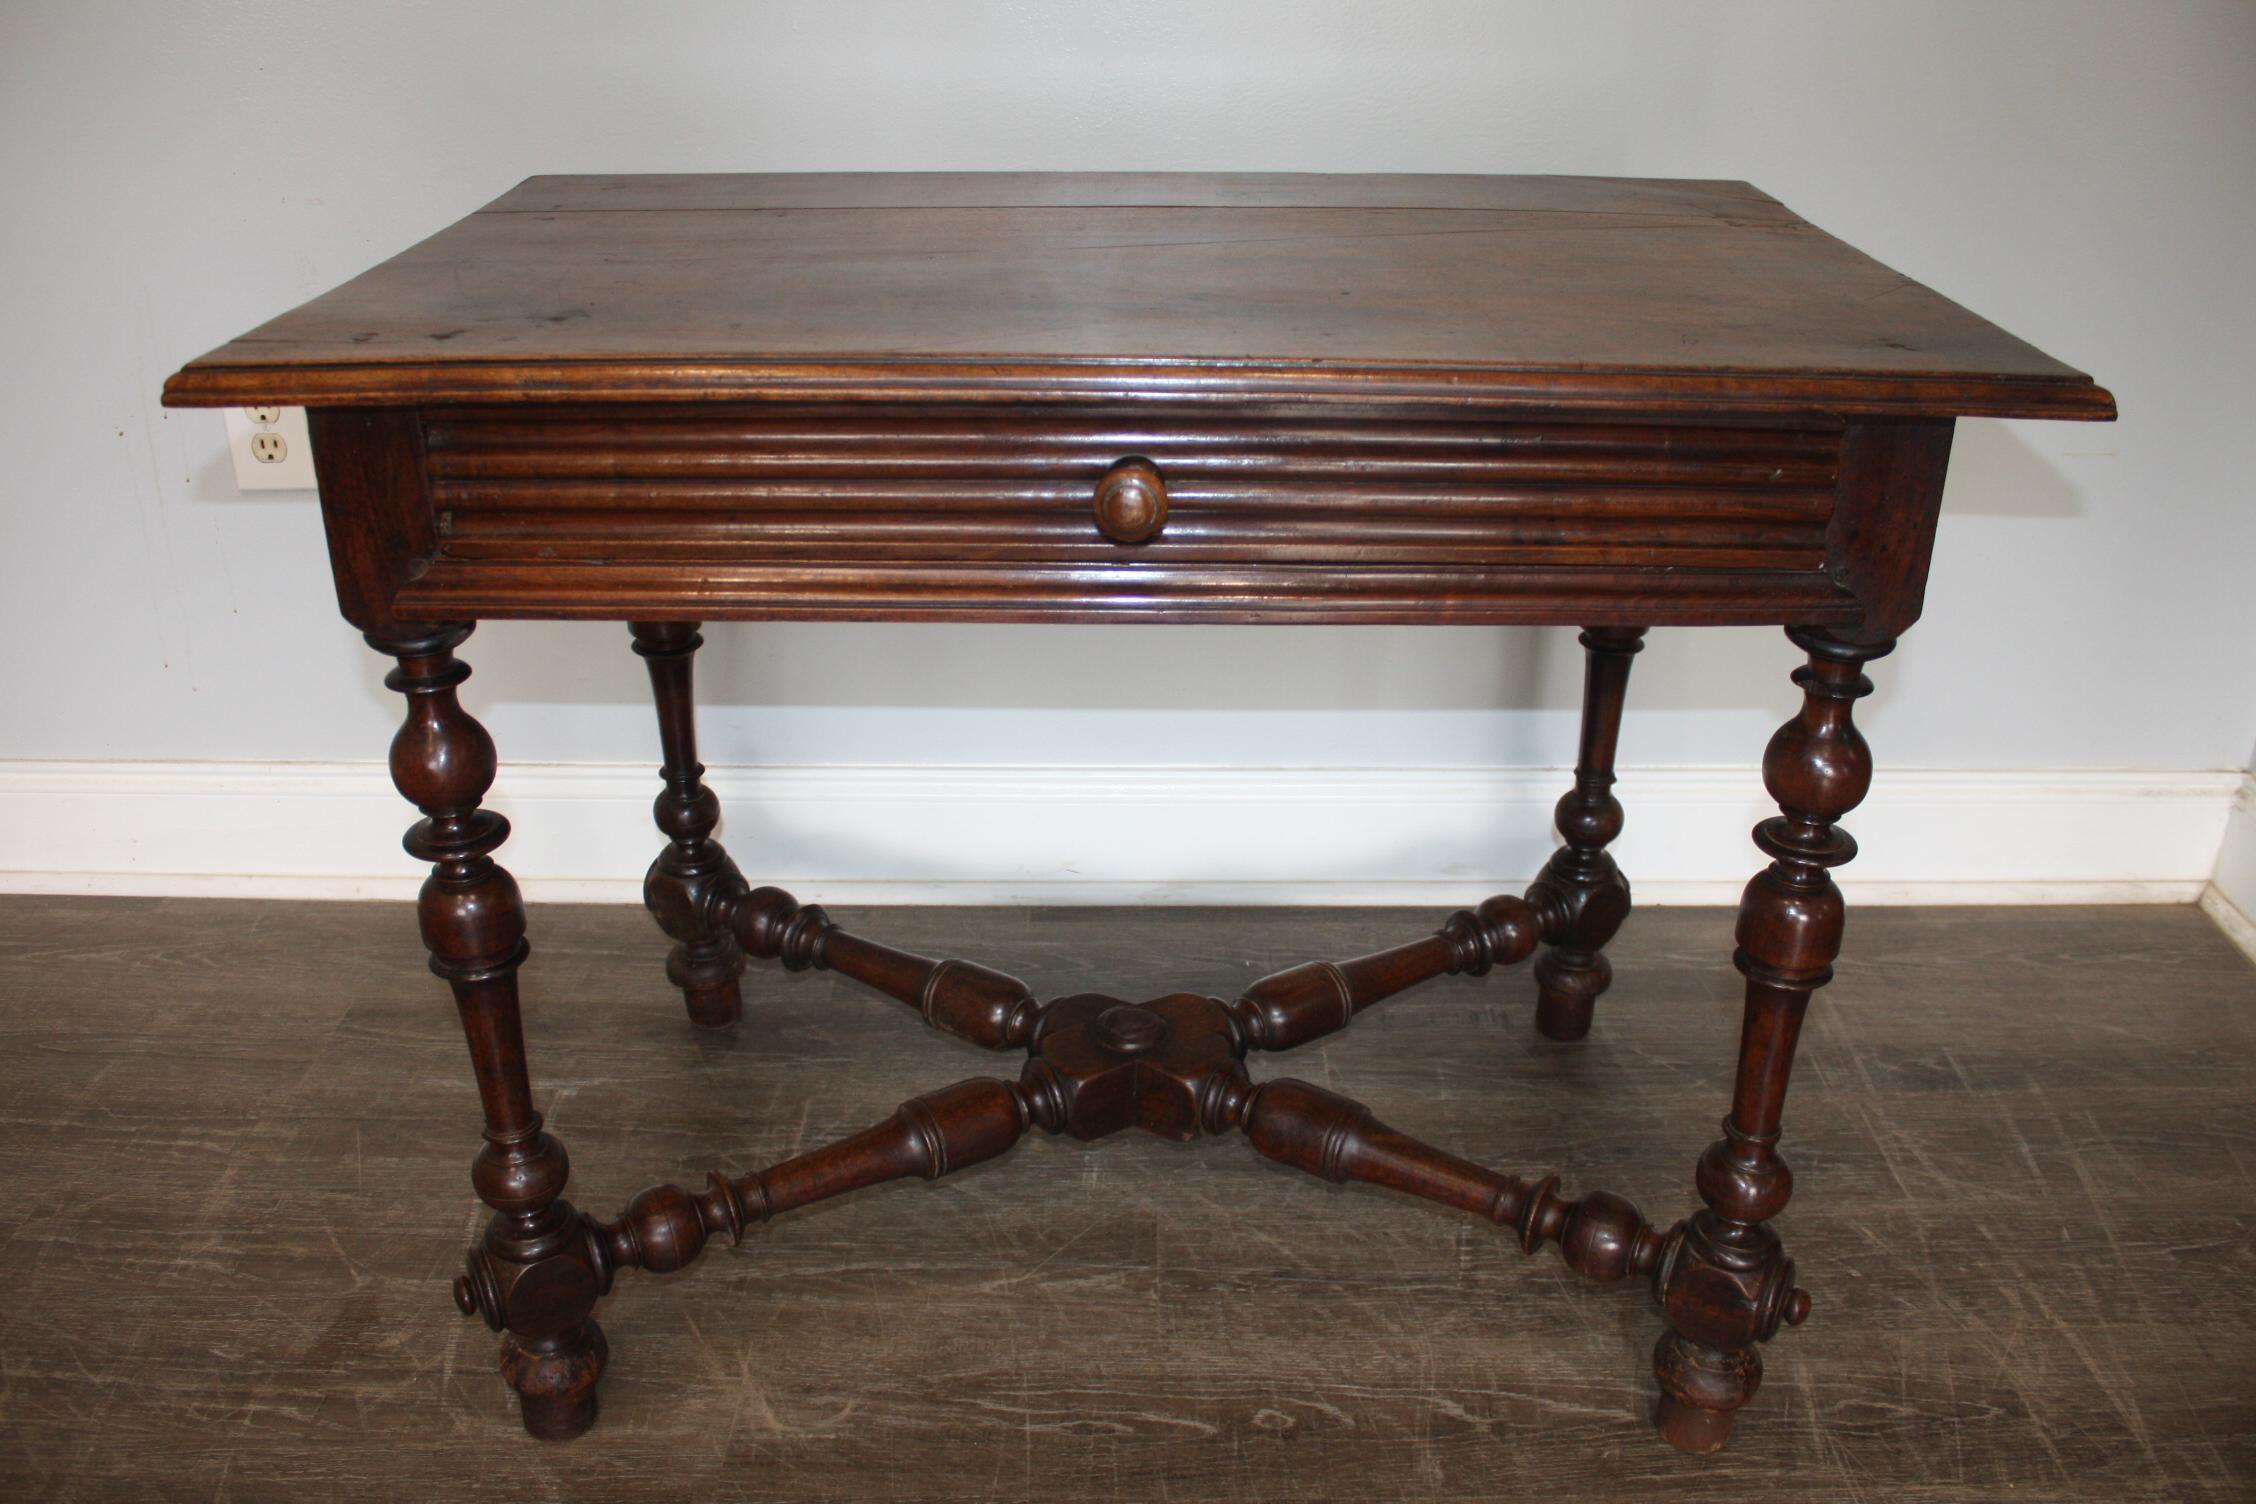 This writing table is made of walnut with wonderful patine.